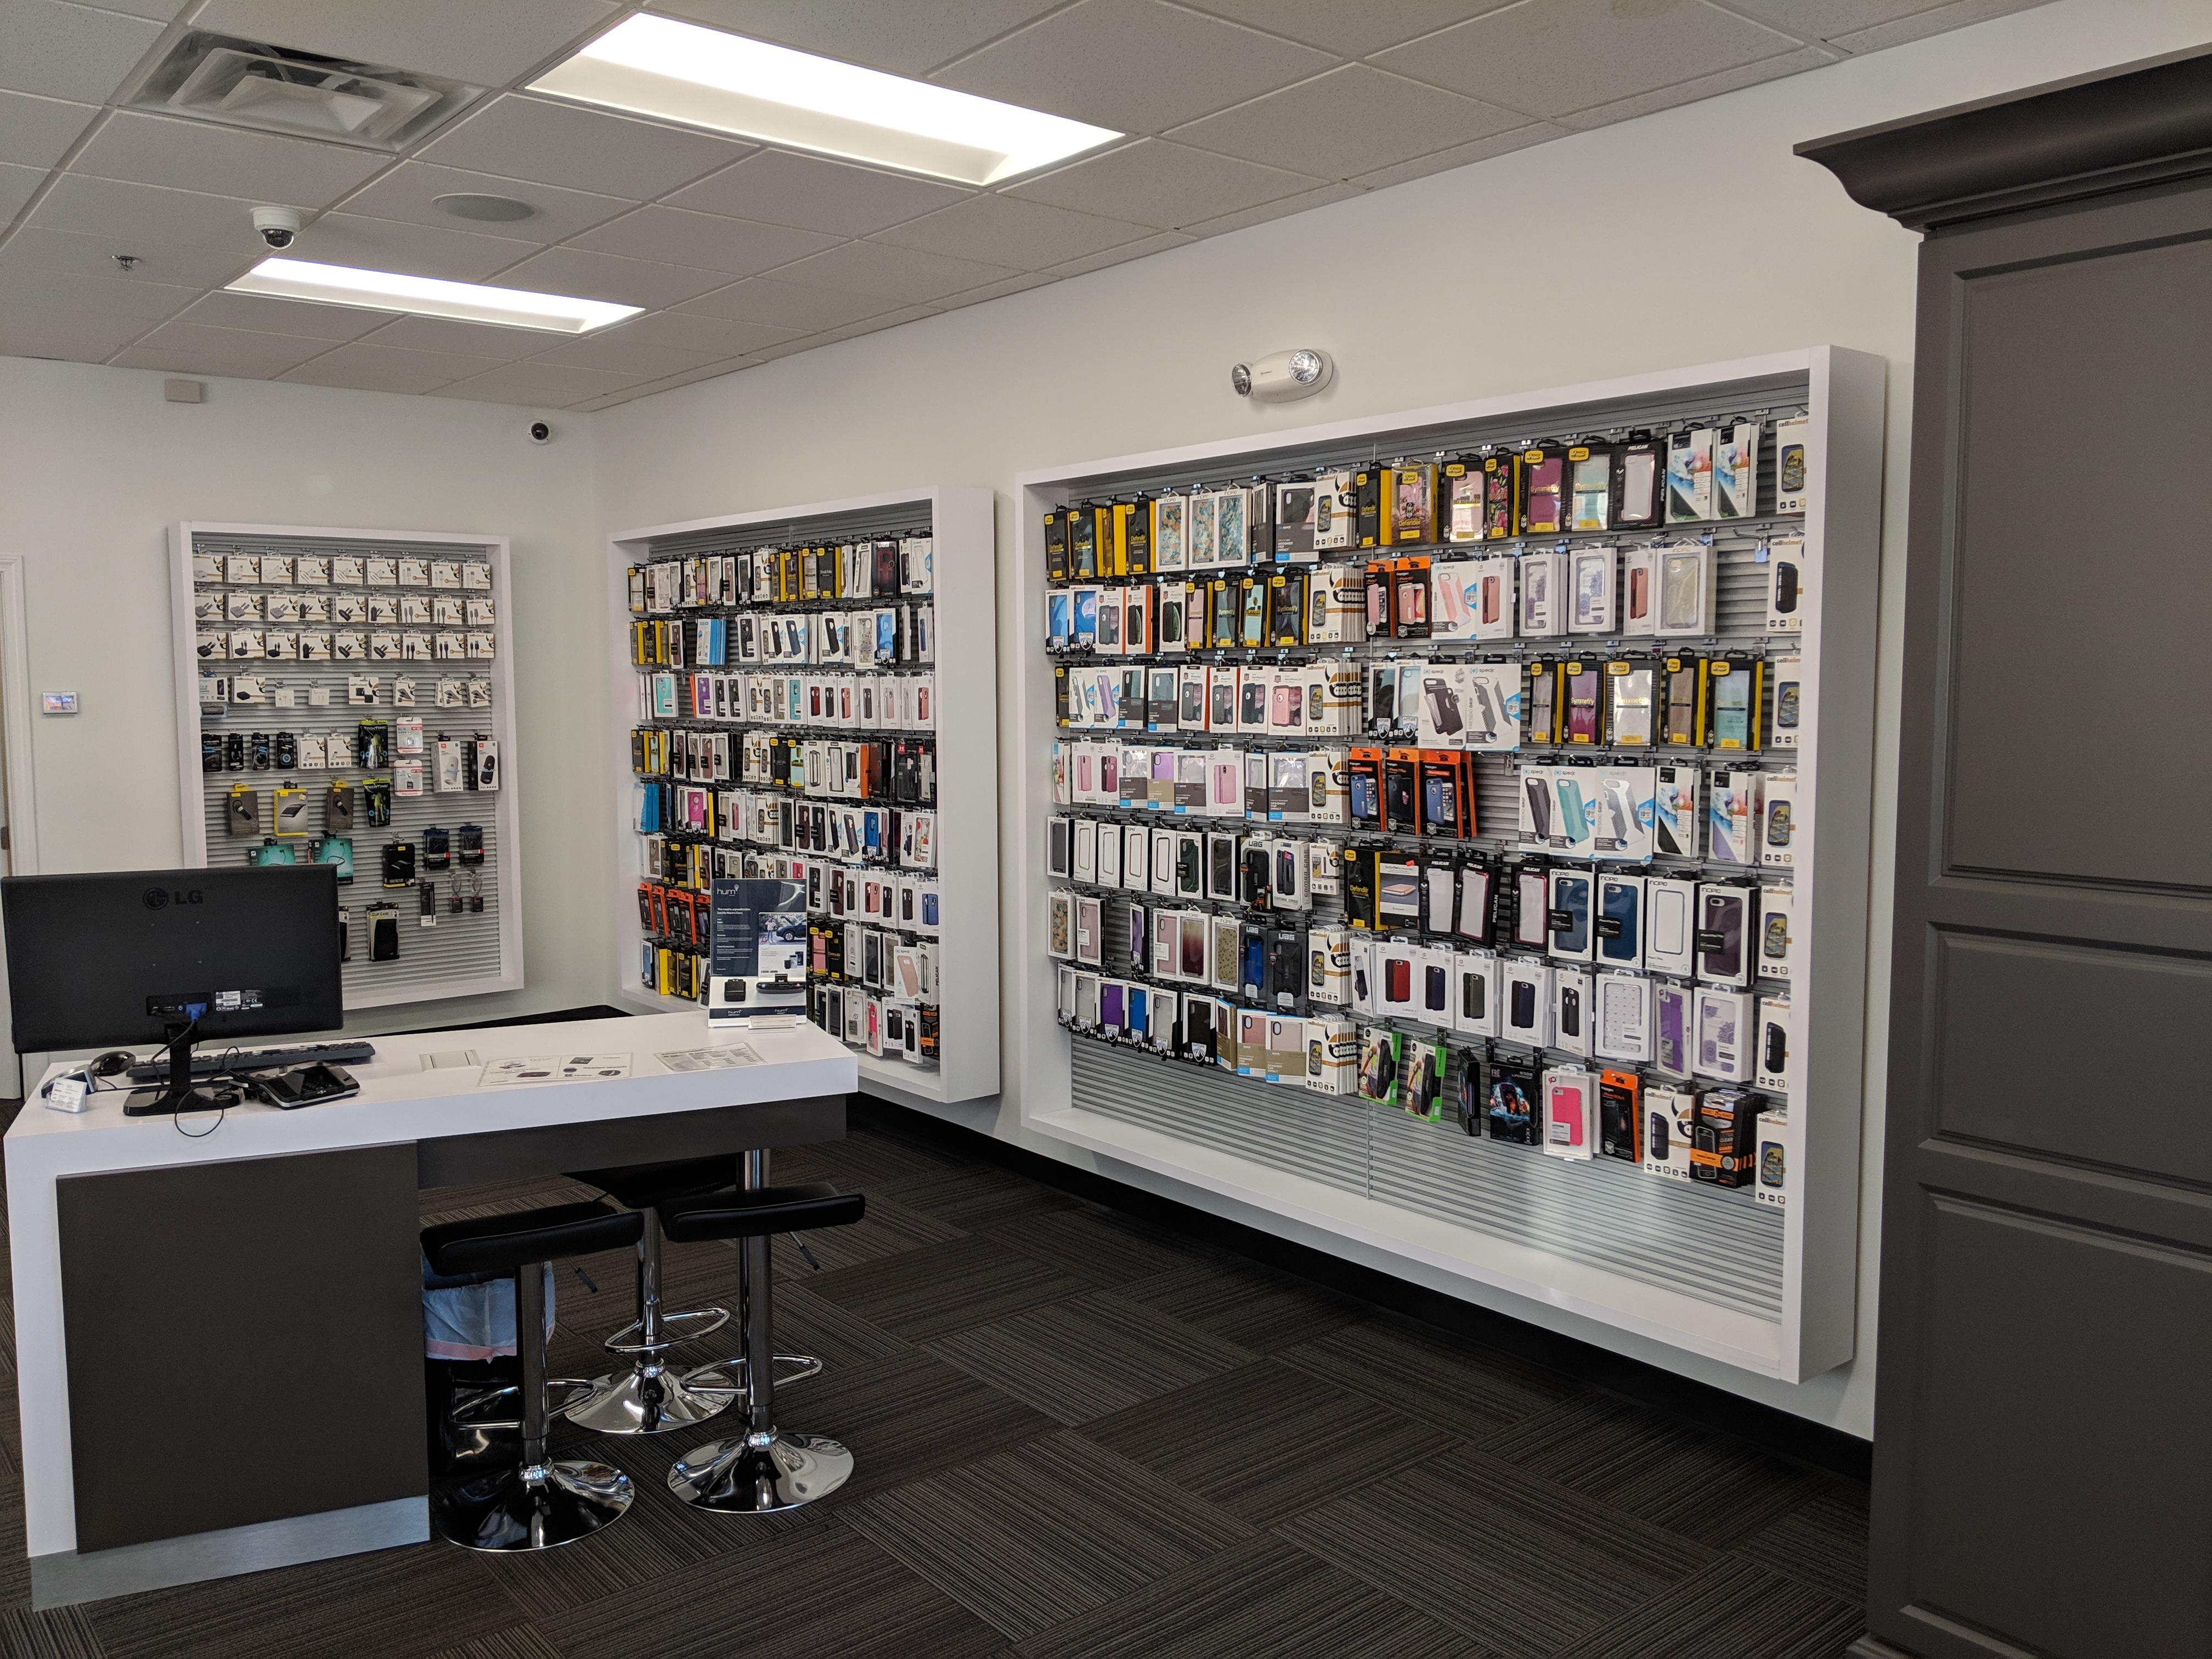 Wireless Zone® of Laconia has remodeled and we invite you to stop by for all your wireless needs!